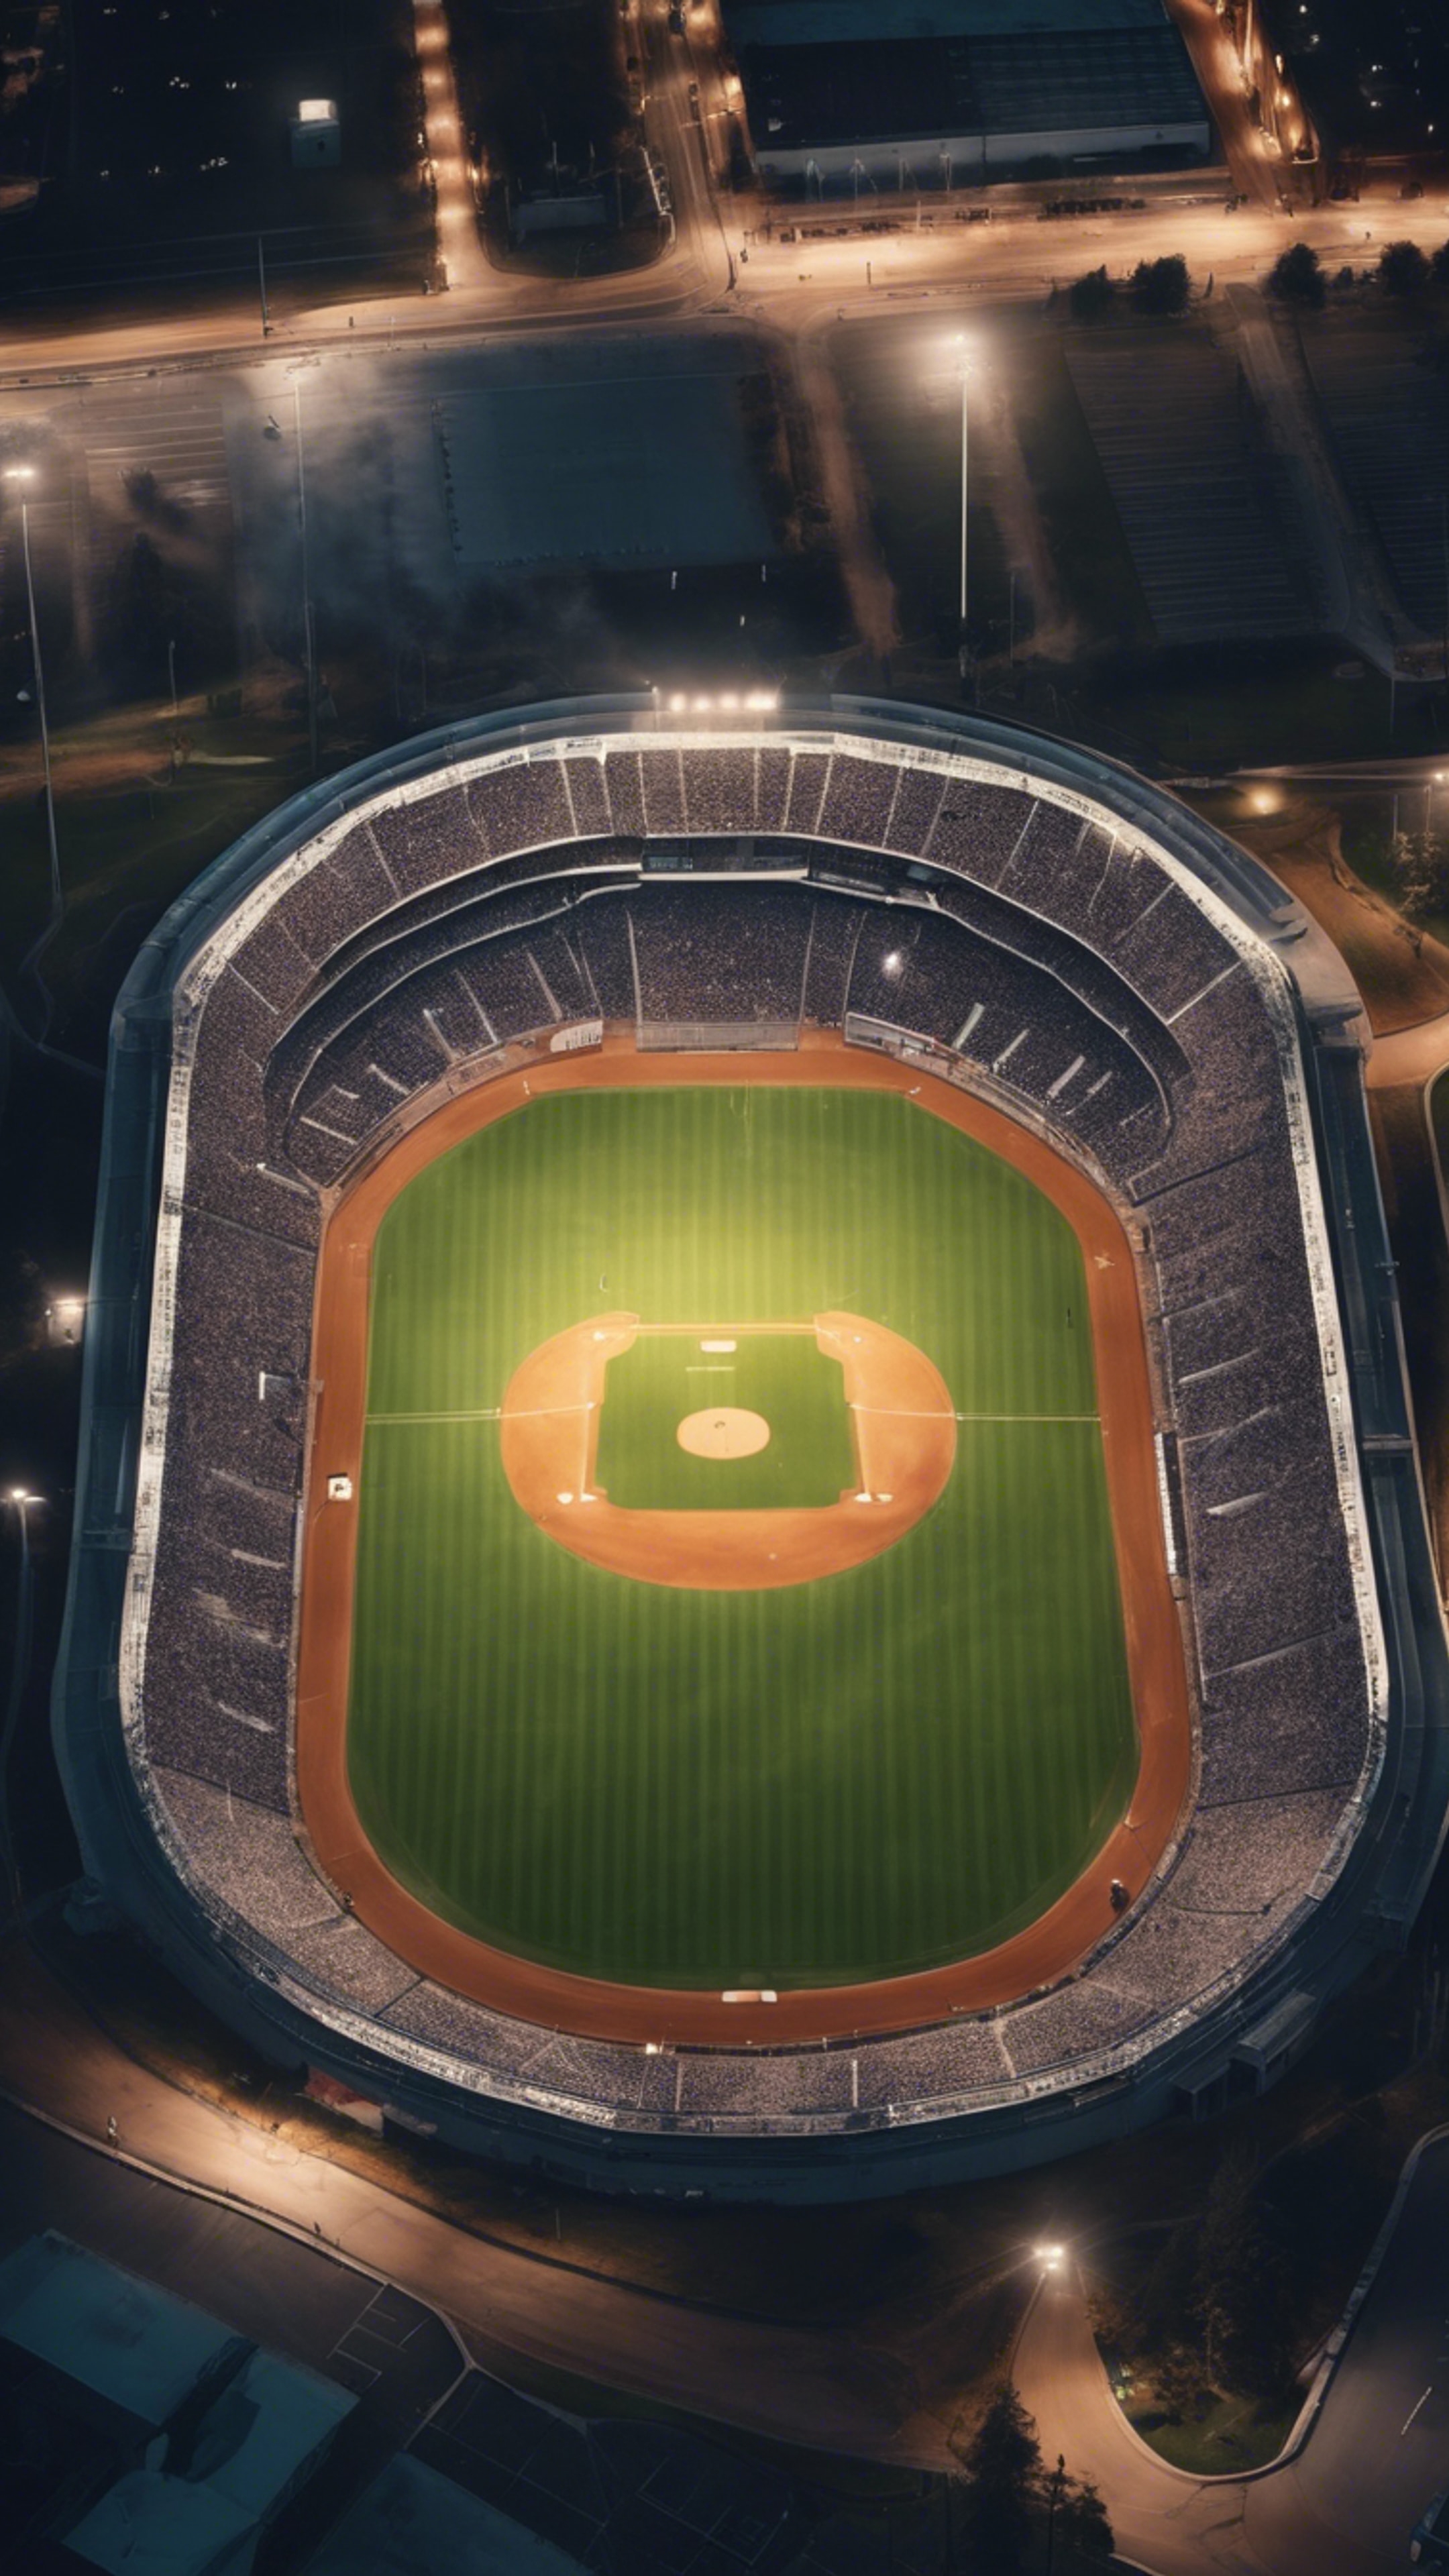 Aerial view of an empty baseball field highlighted by stadium lights in a clear night. Tapeta[11420cd4e6014be4a648]